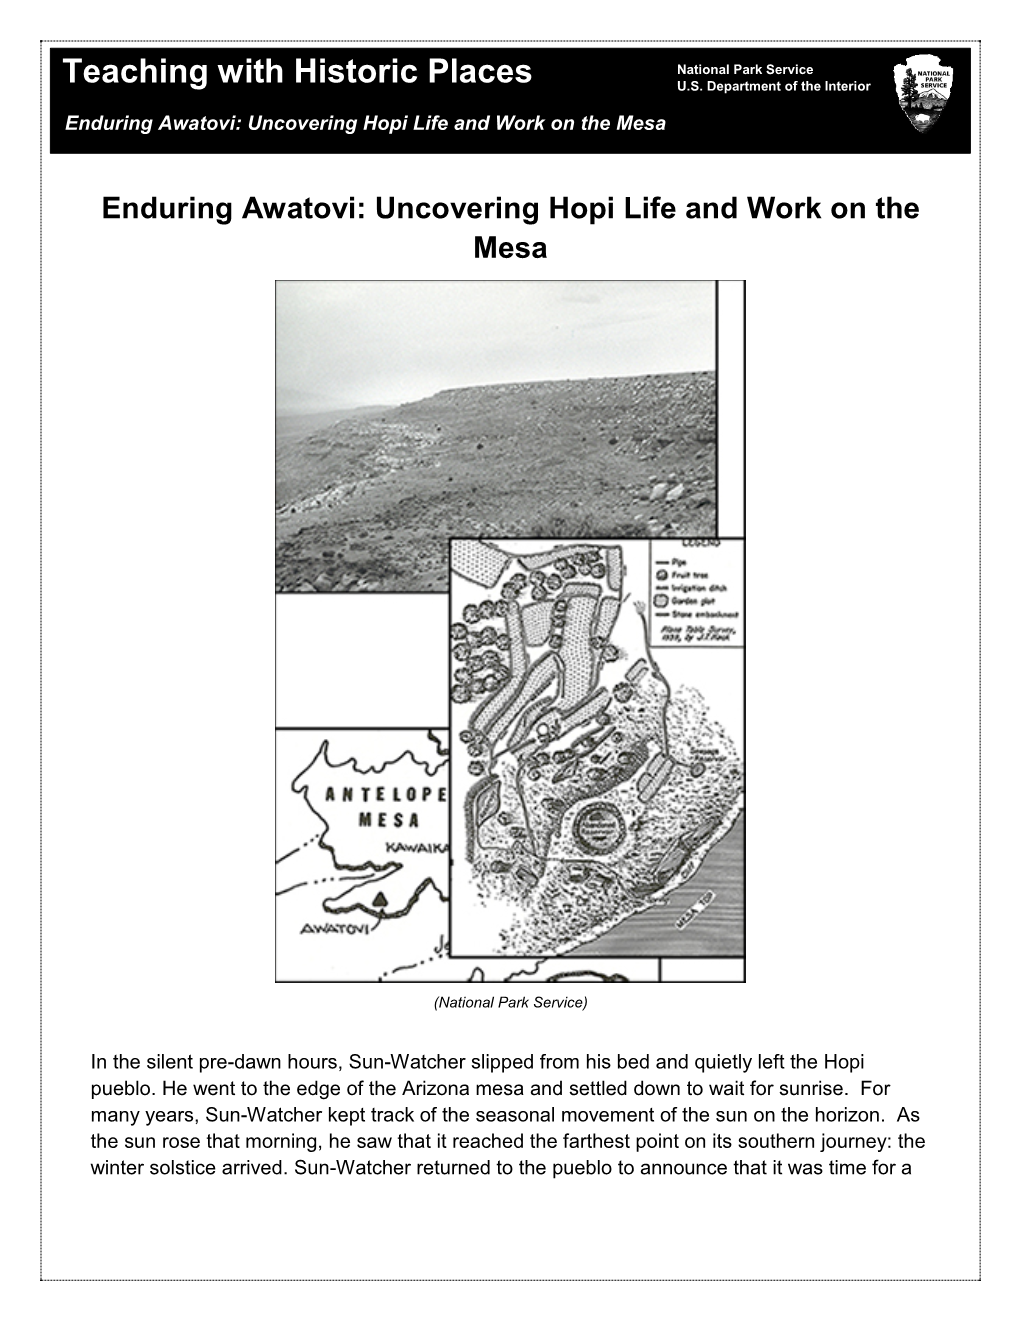 Enduring Awatovi: Uncovering Hopi Life and Work on the Mesa